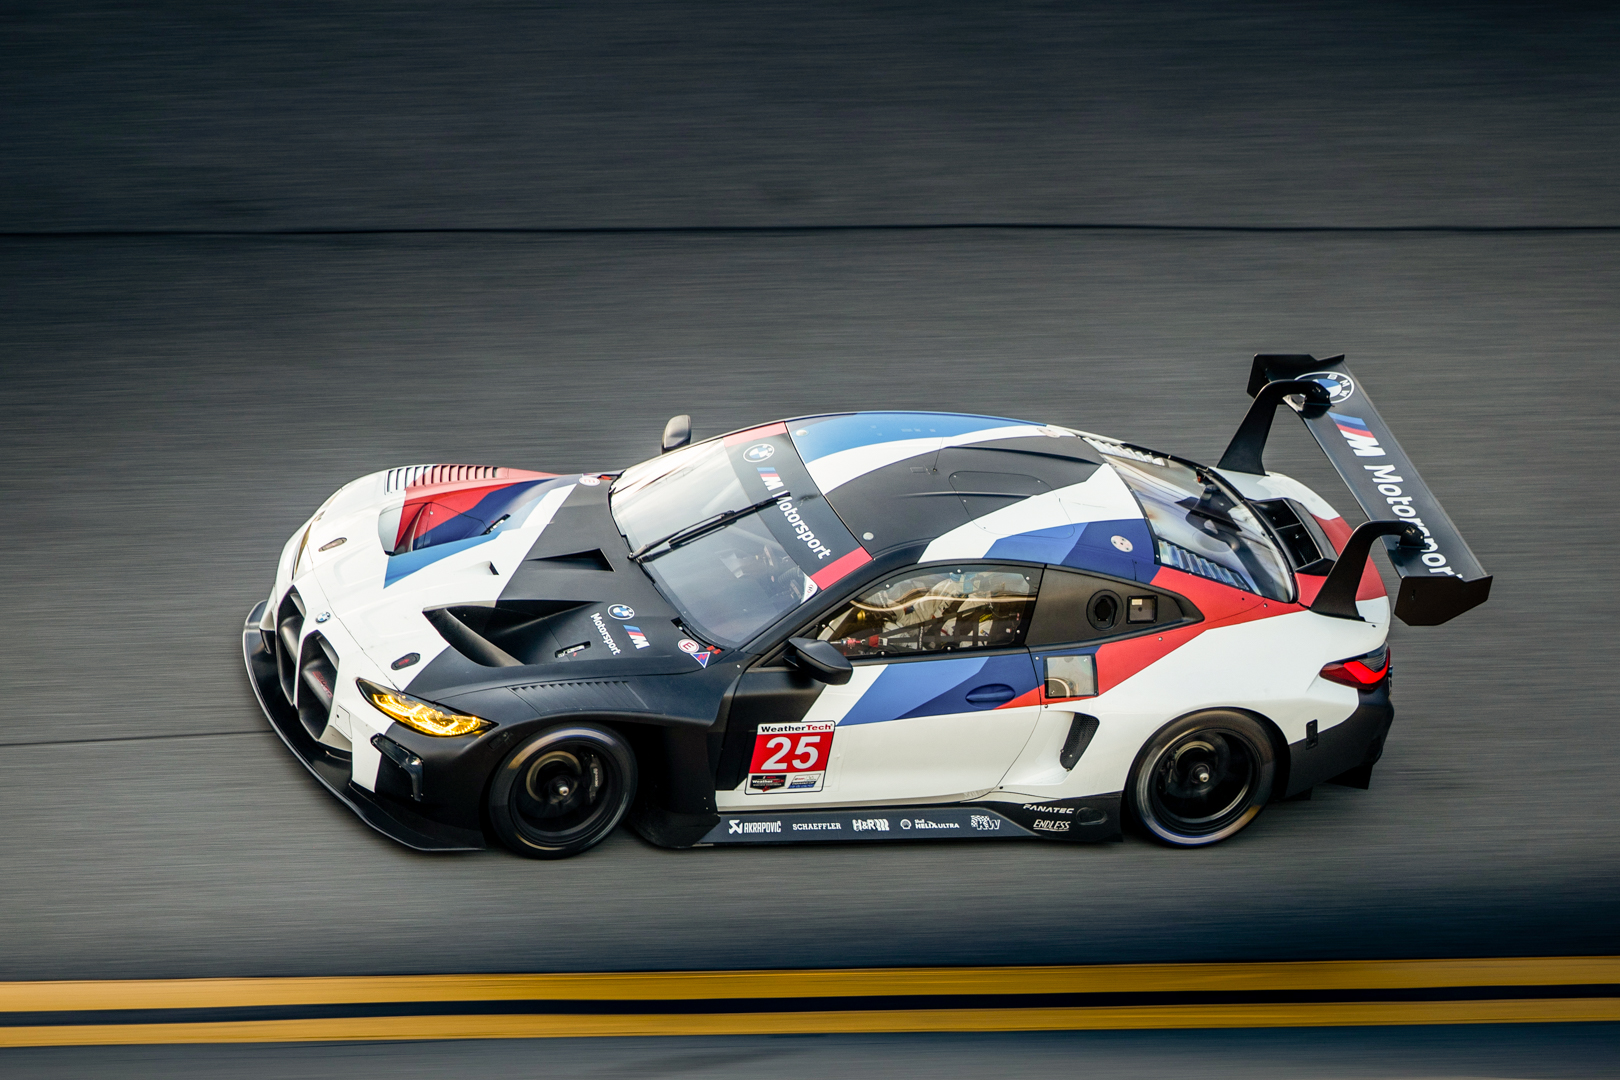 BMW M Team RLL driver line-up for the 24 Hours of Daytona has been decided